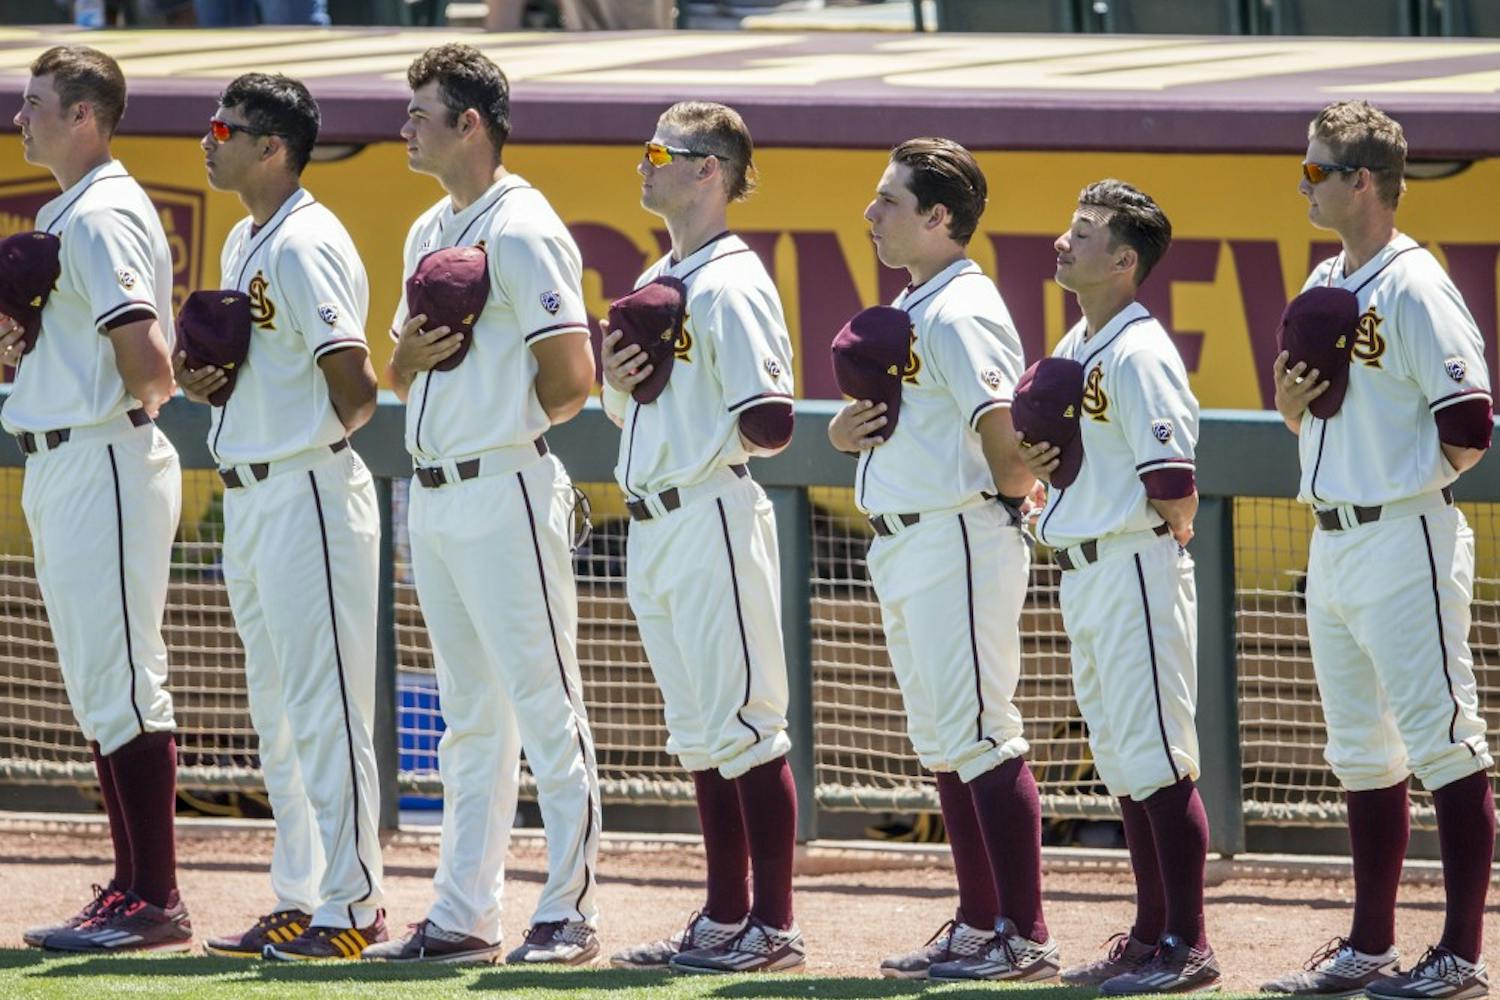 ASU baseball players remove their hats for the National Anthem before a game against California at Phoenix Municipal Stadium in Phoenix, Arizona, on Sunday, April 17, 2016. The Sun Devils won the final game in this series 4-0.